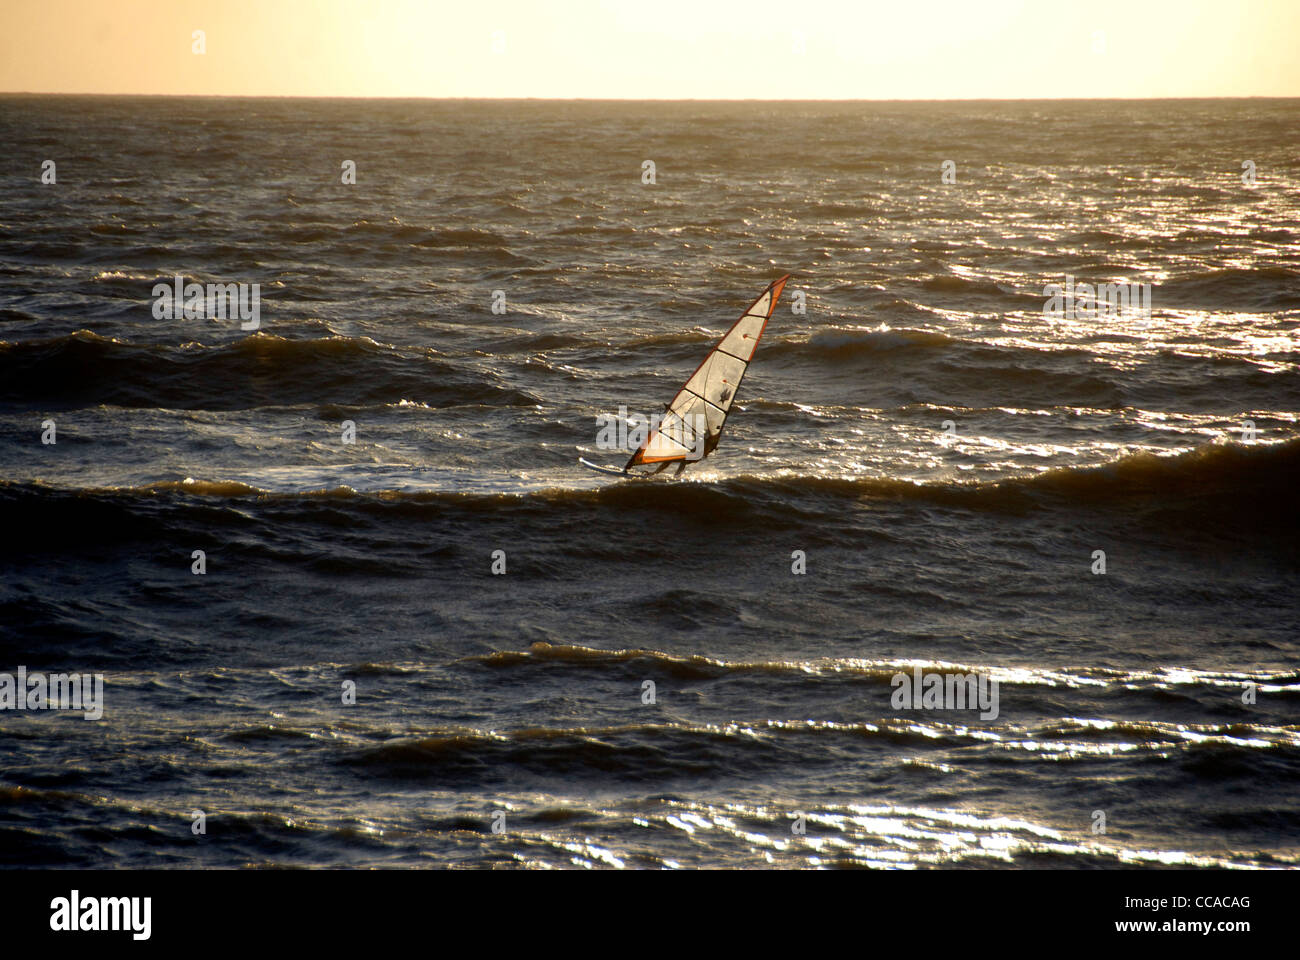 Wind surfer in winter waves, Brighton and Hove, UK Stock Photo